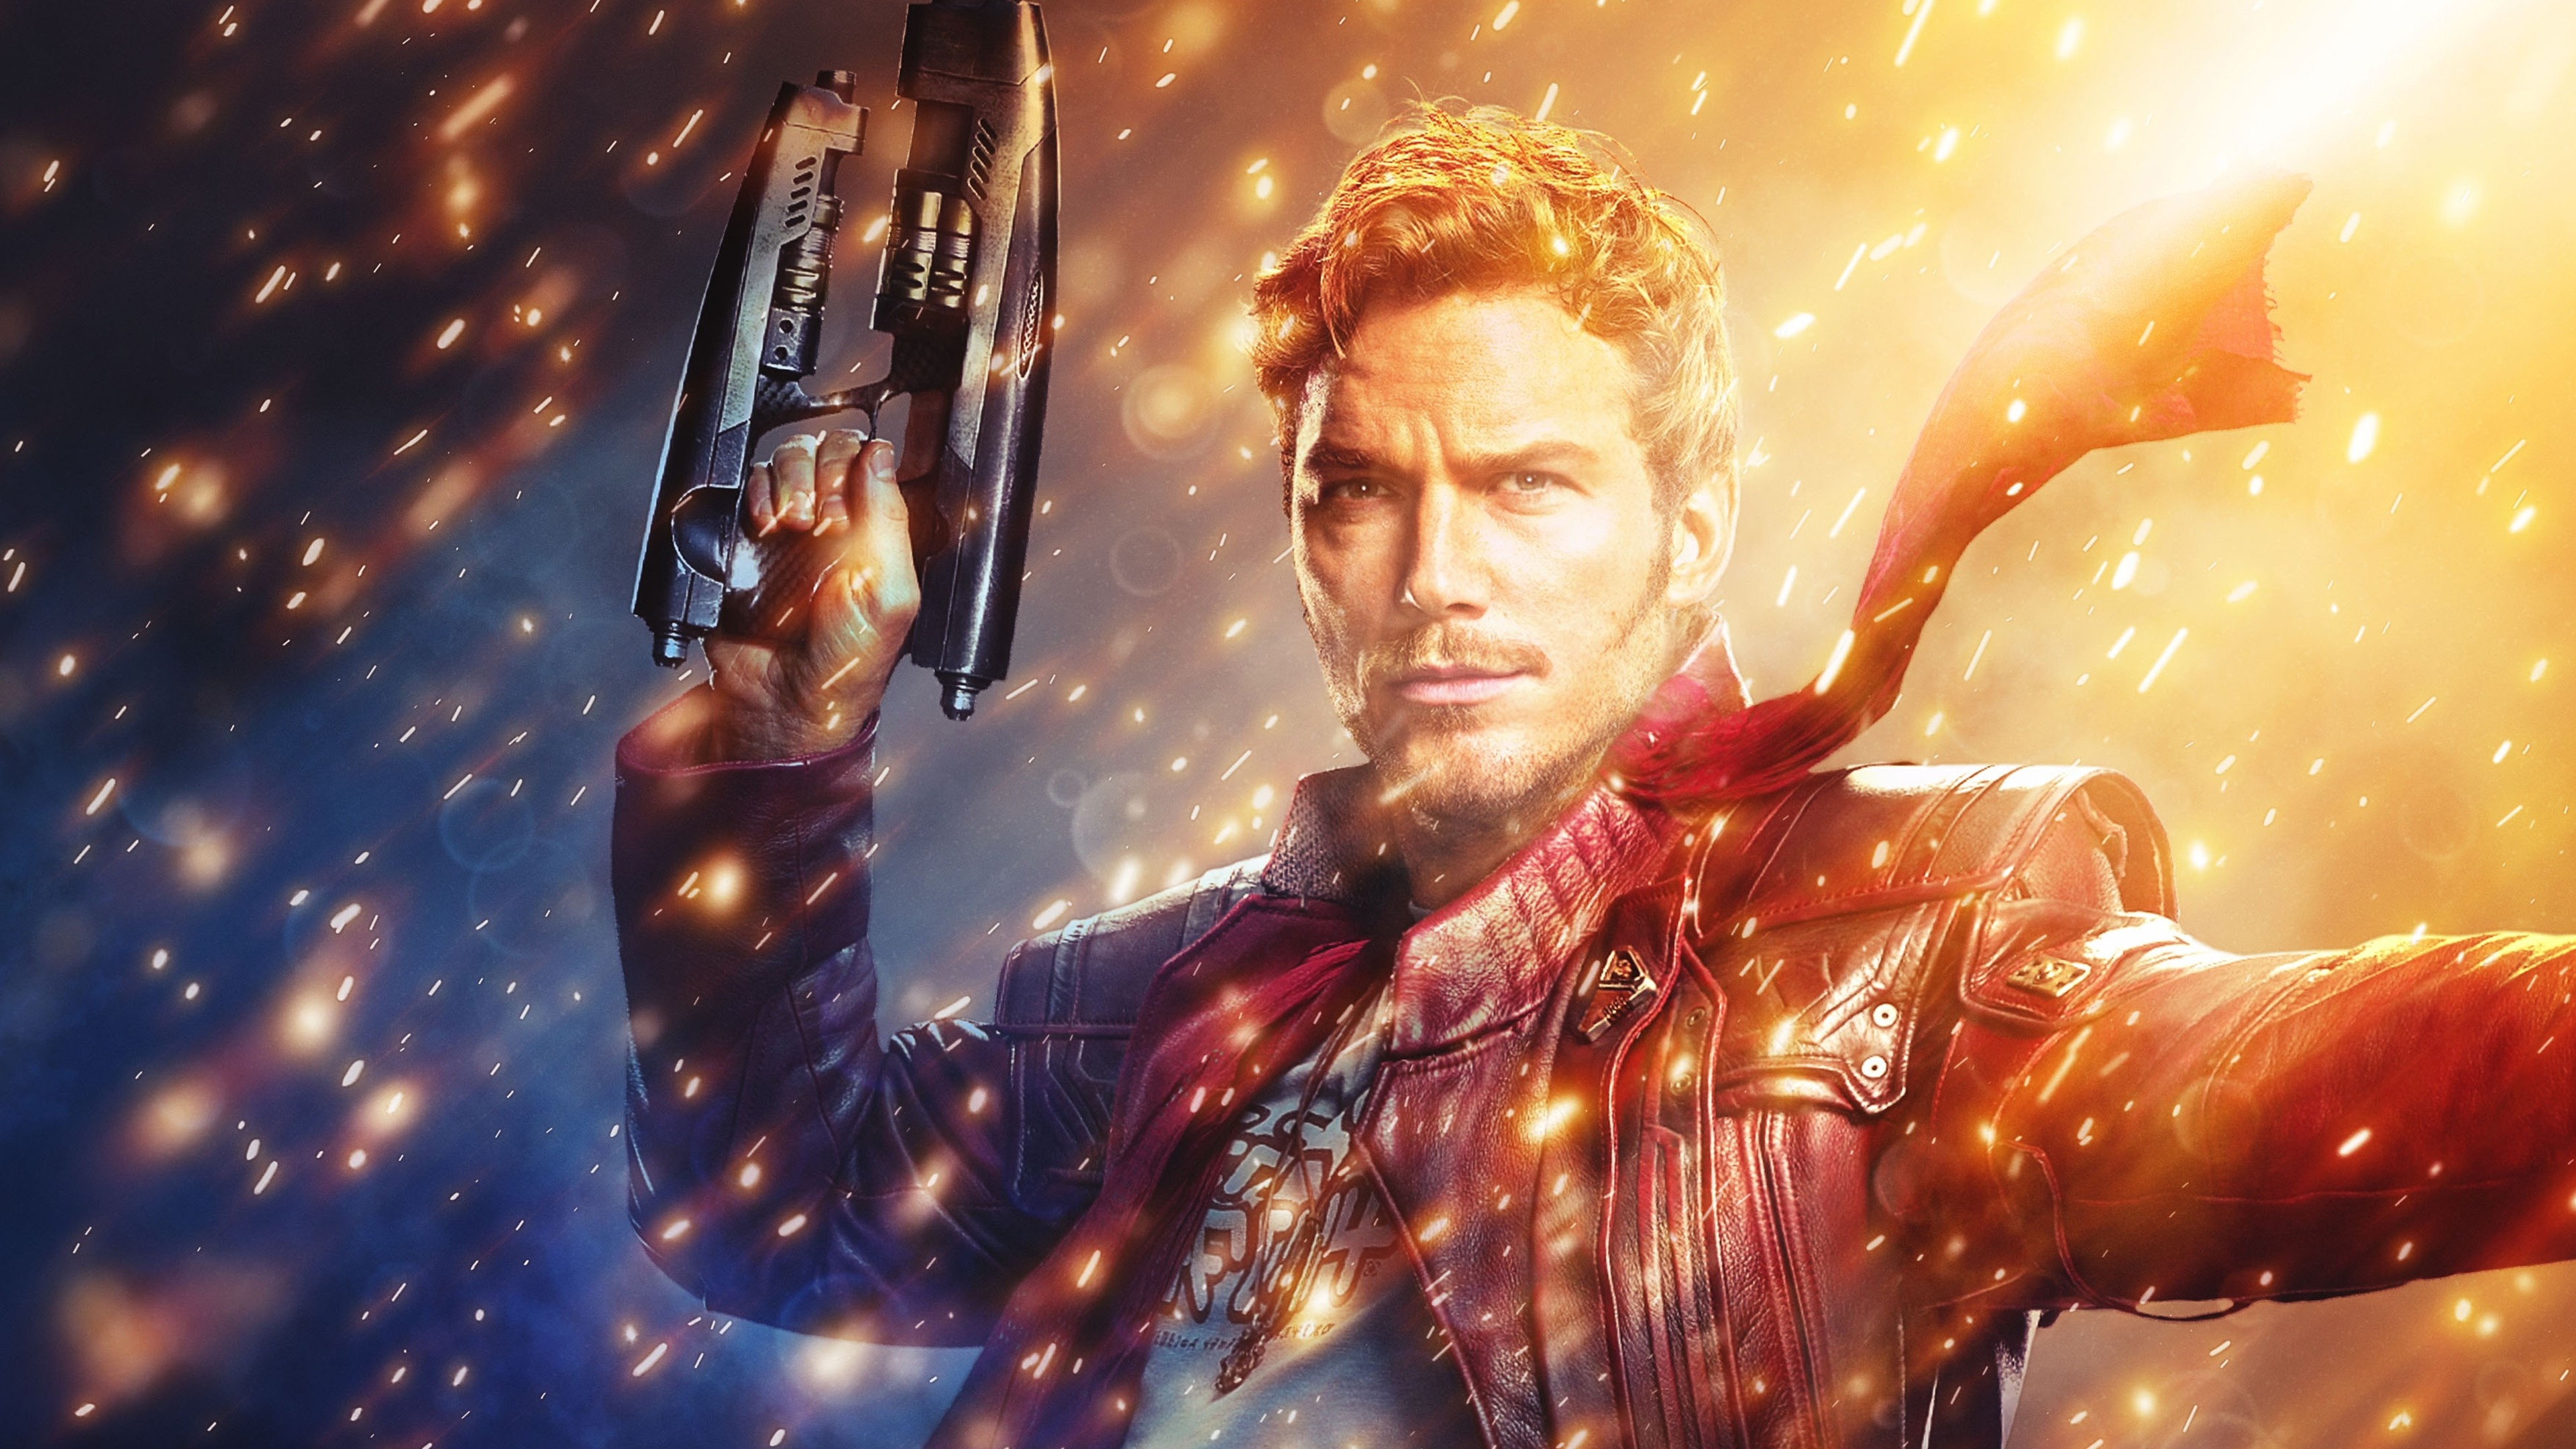 Chris Pratt: Peter Jason Quill, known by his alias Star-Lord. 3840x2160 4K Background.